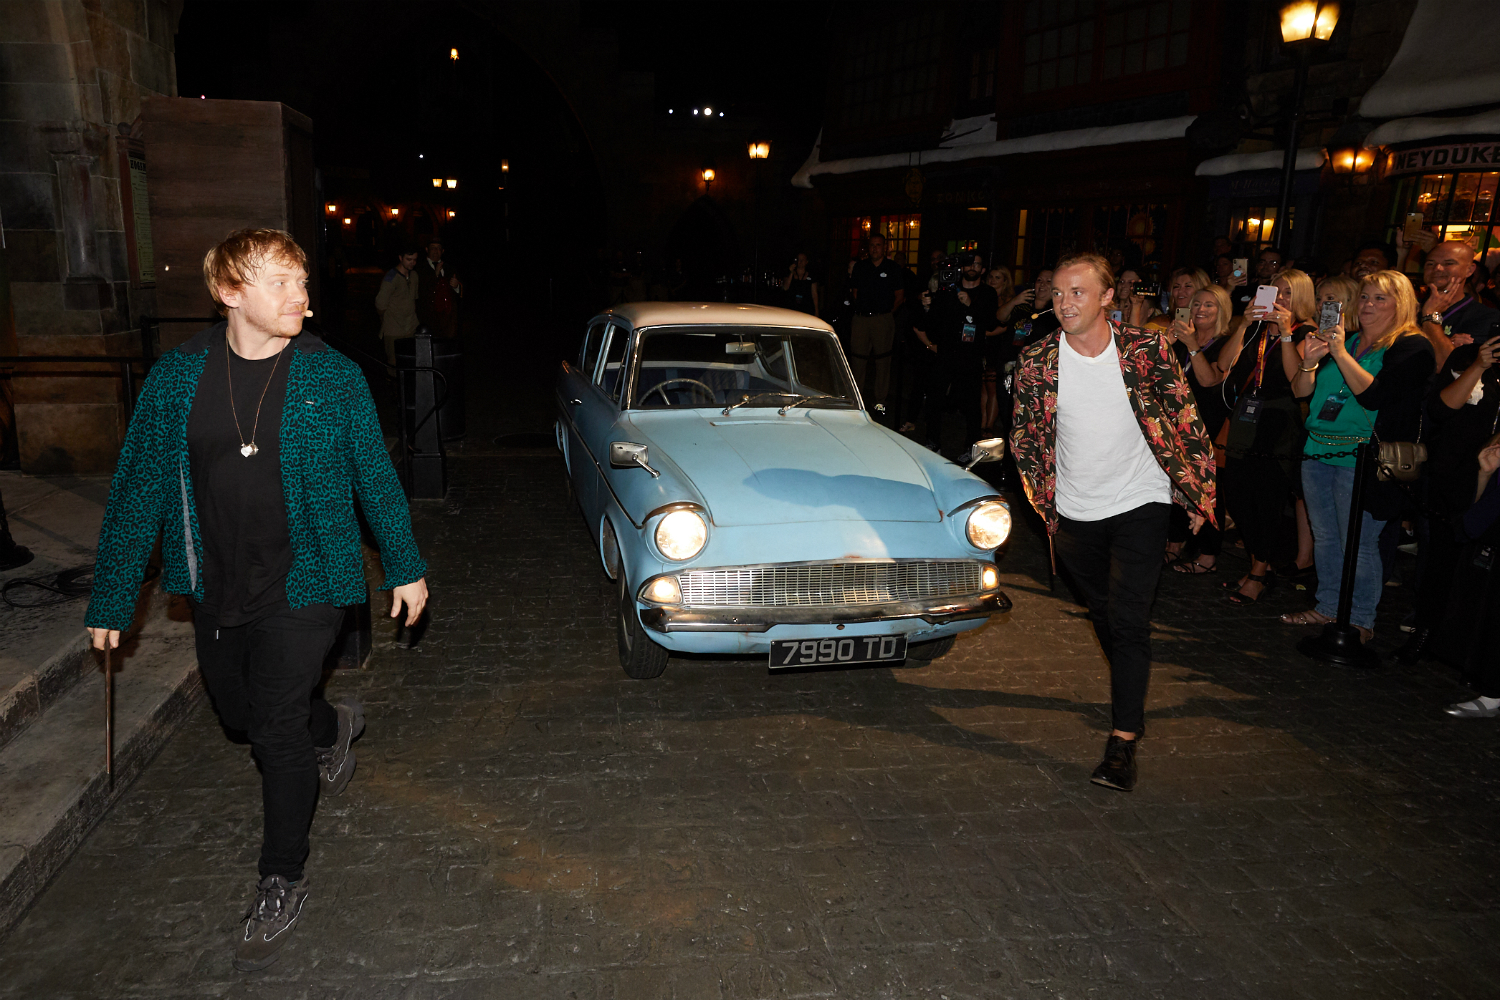 Rupert Grint and Tom Felton emerge from Arthur Weasley’s Ford Anglia to join fellow cast members onstage.